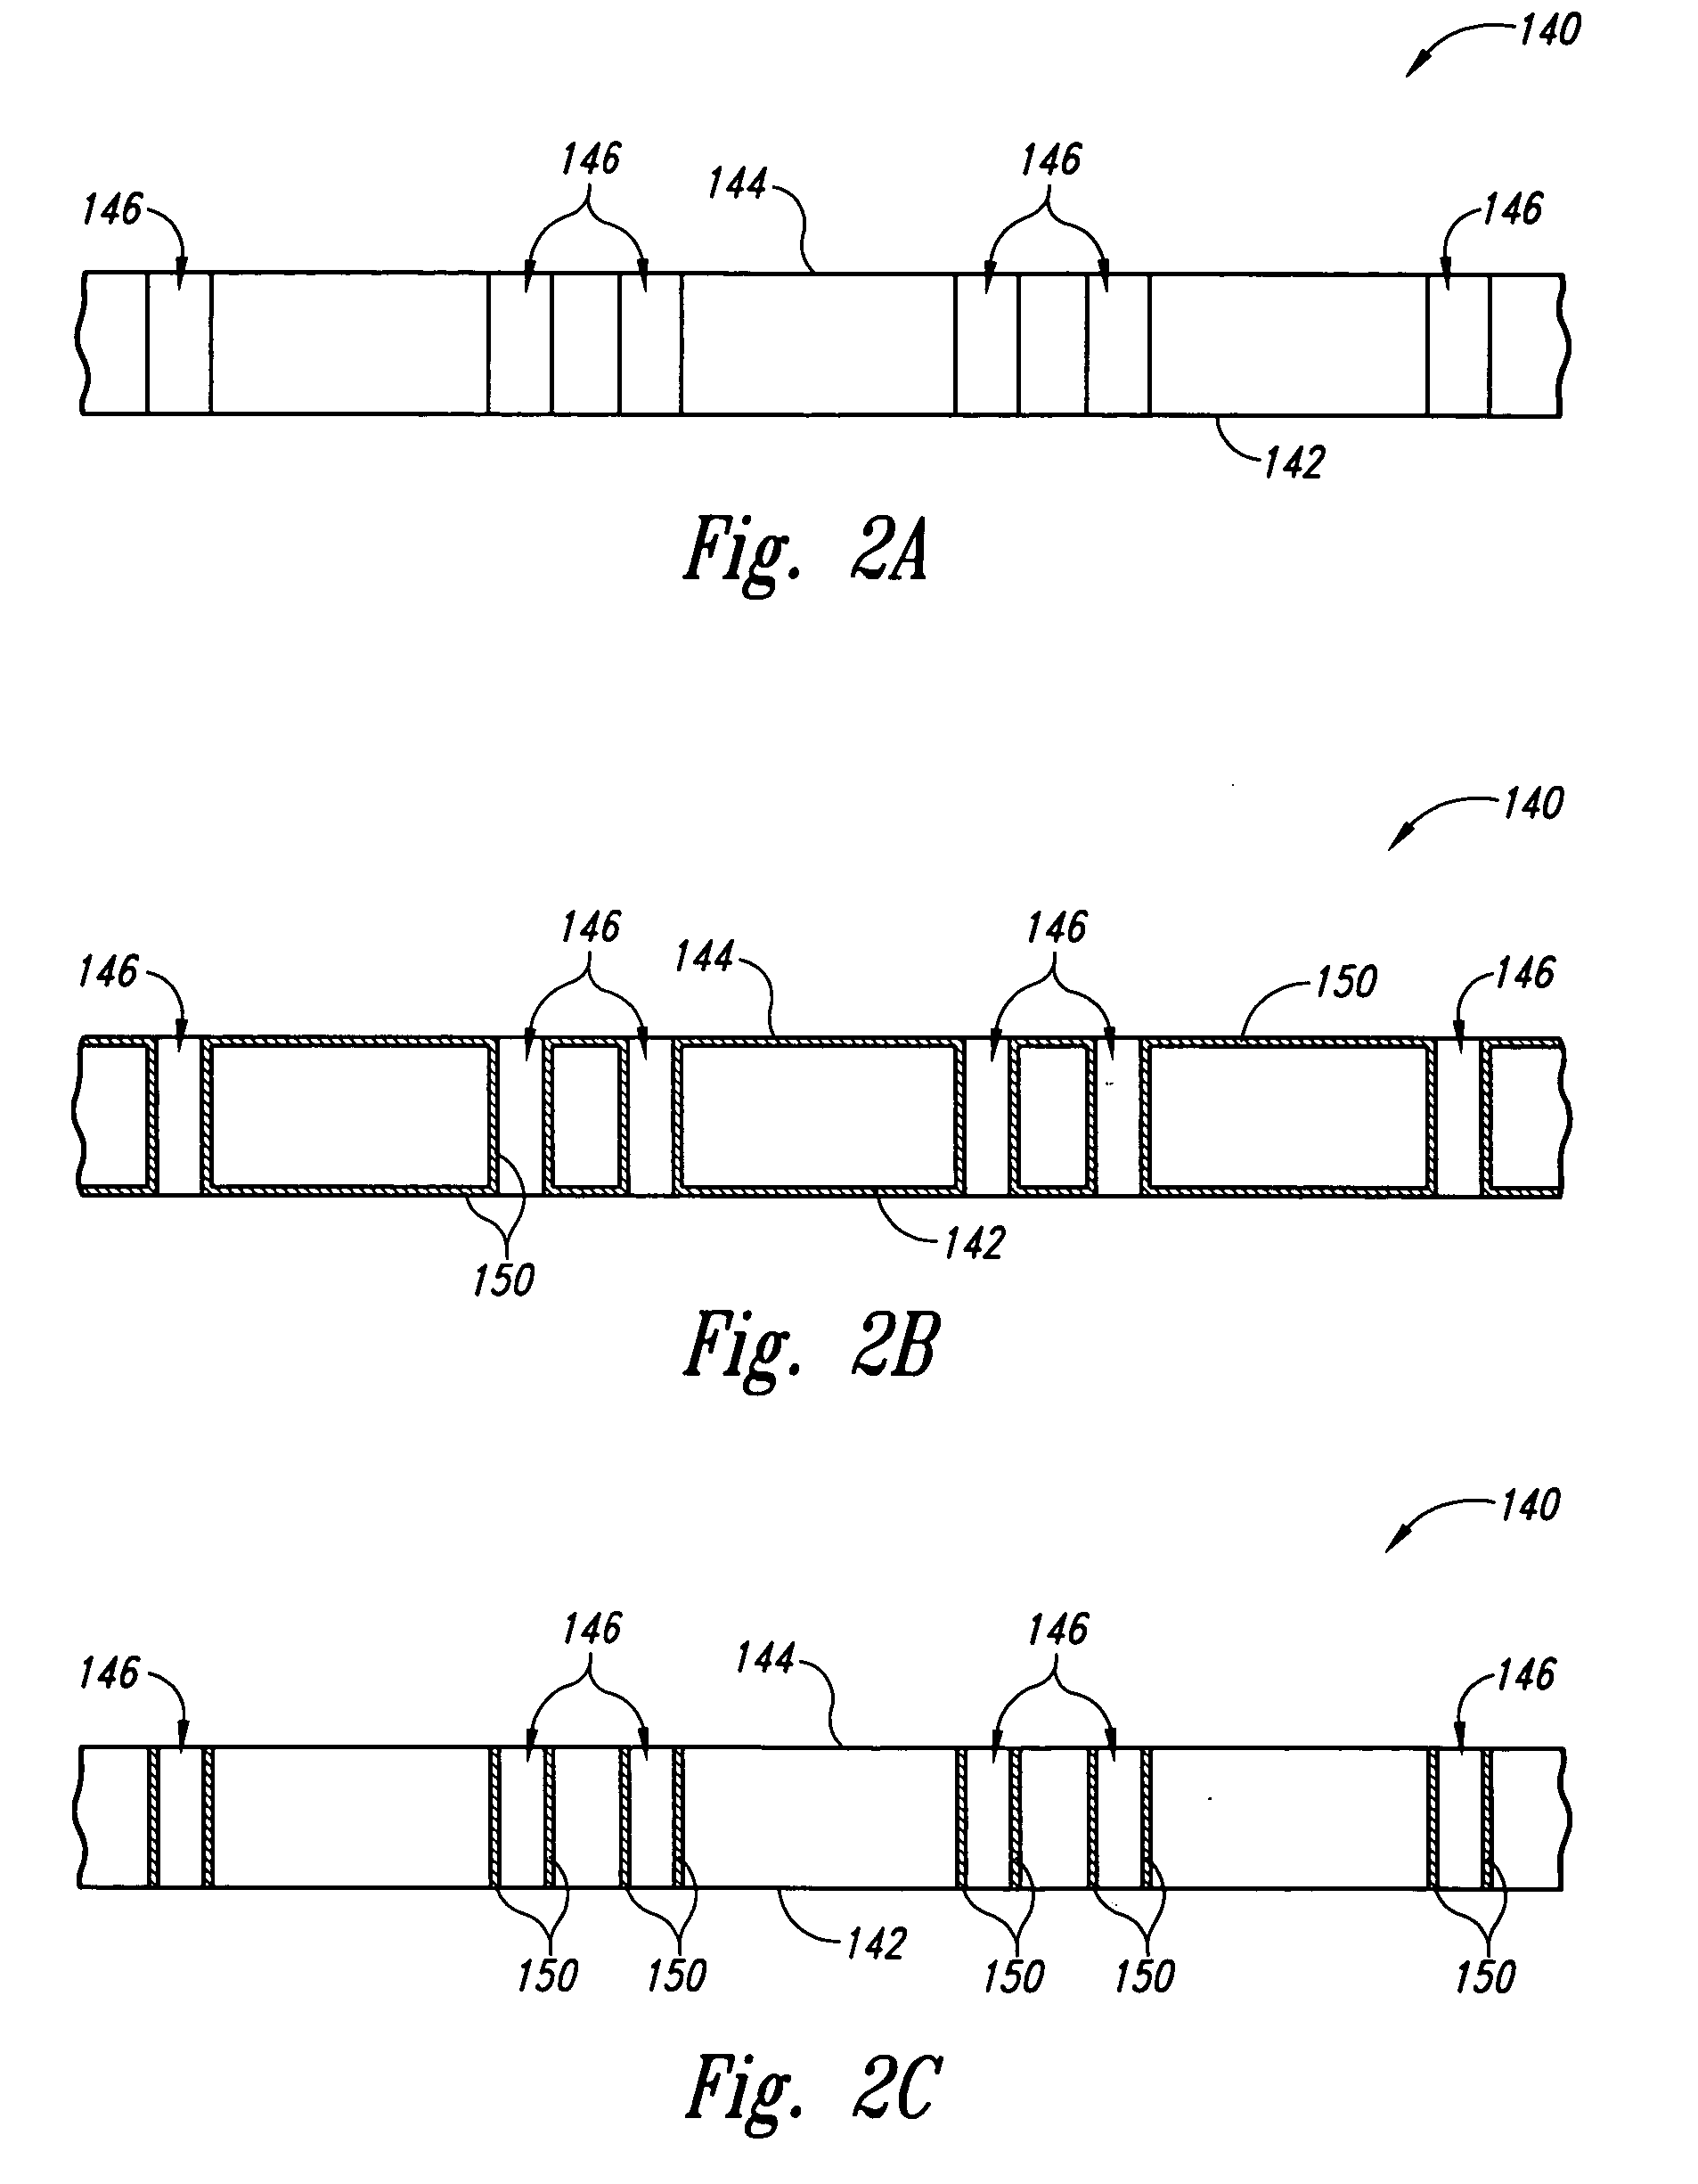 Packaged microelectronic imaging devices and methods of packaging microelectronic imaging devices